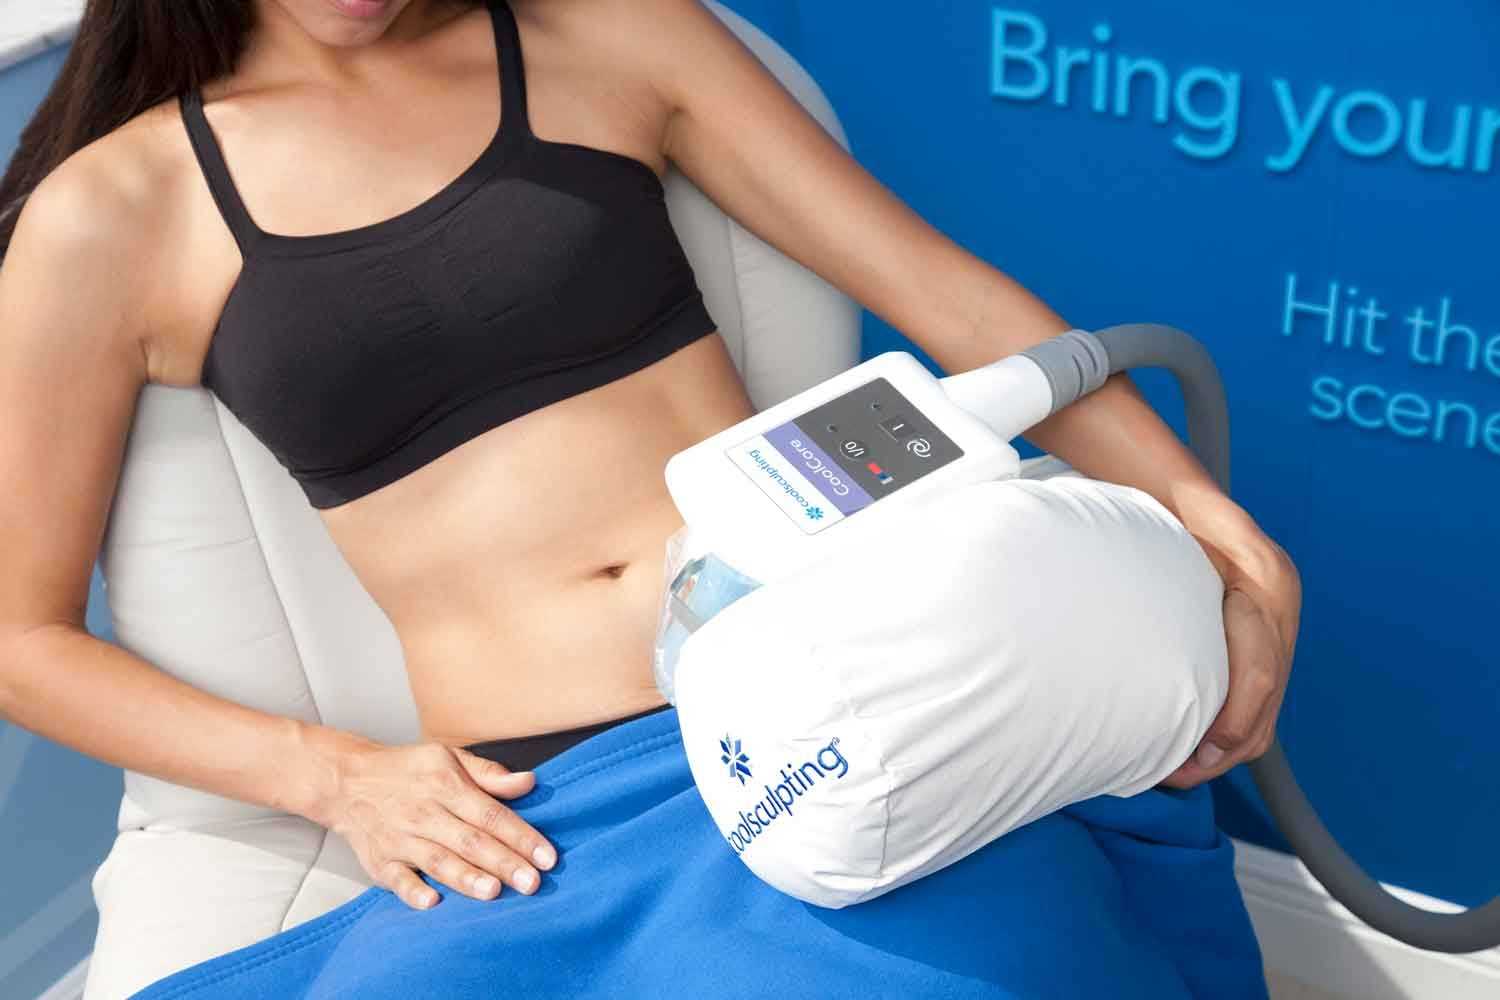 How to Get Rid of Body Fat using CoolSculpting?